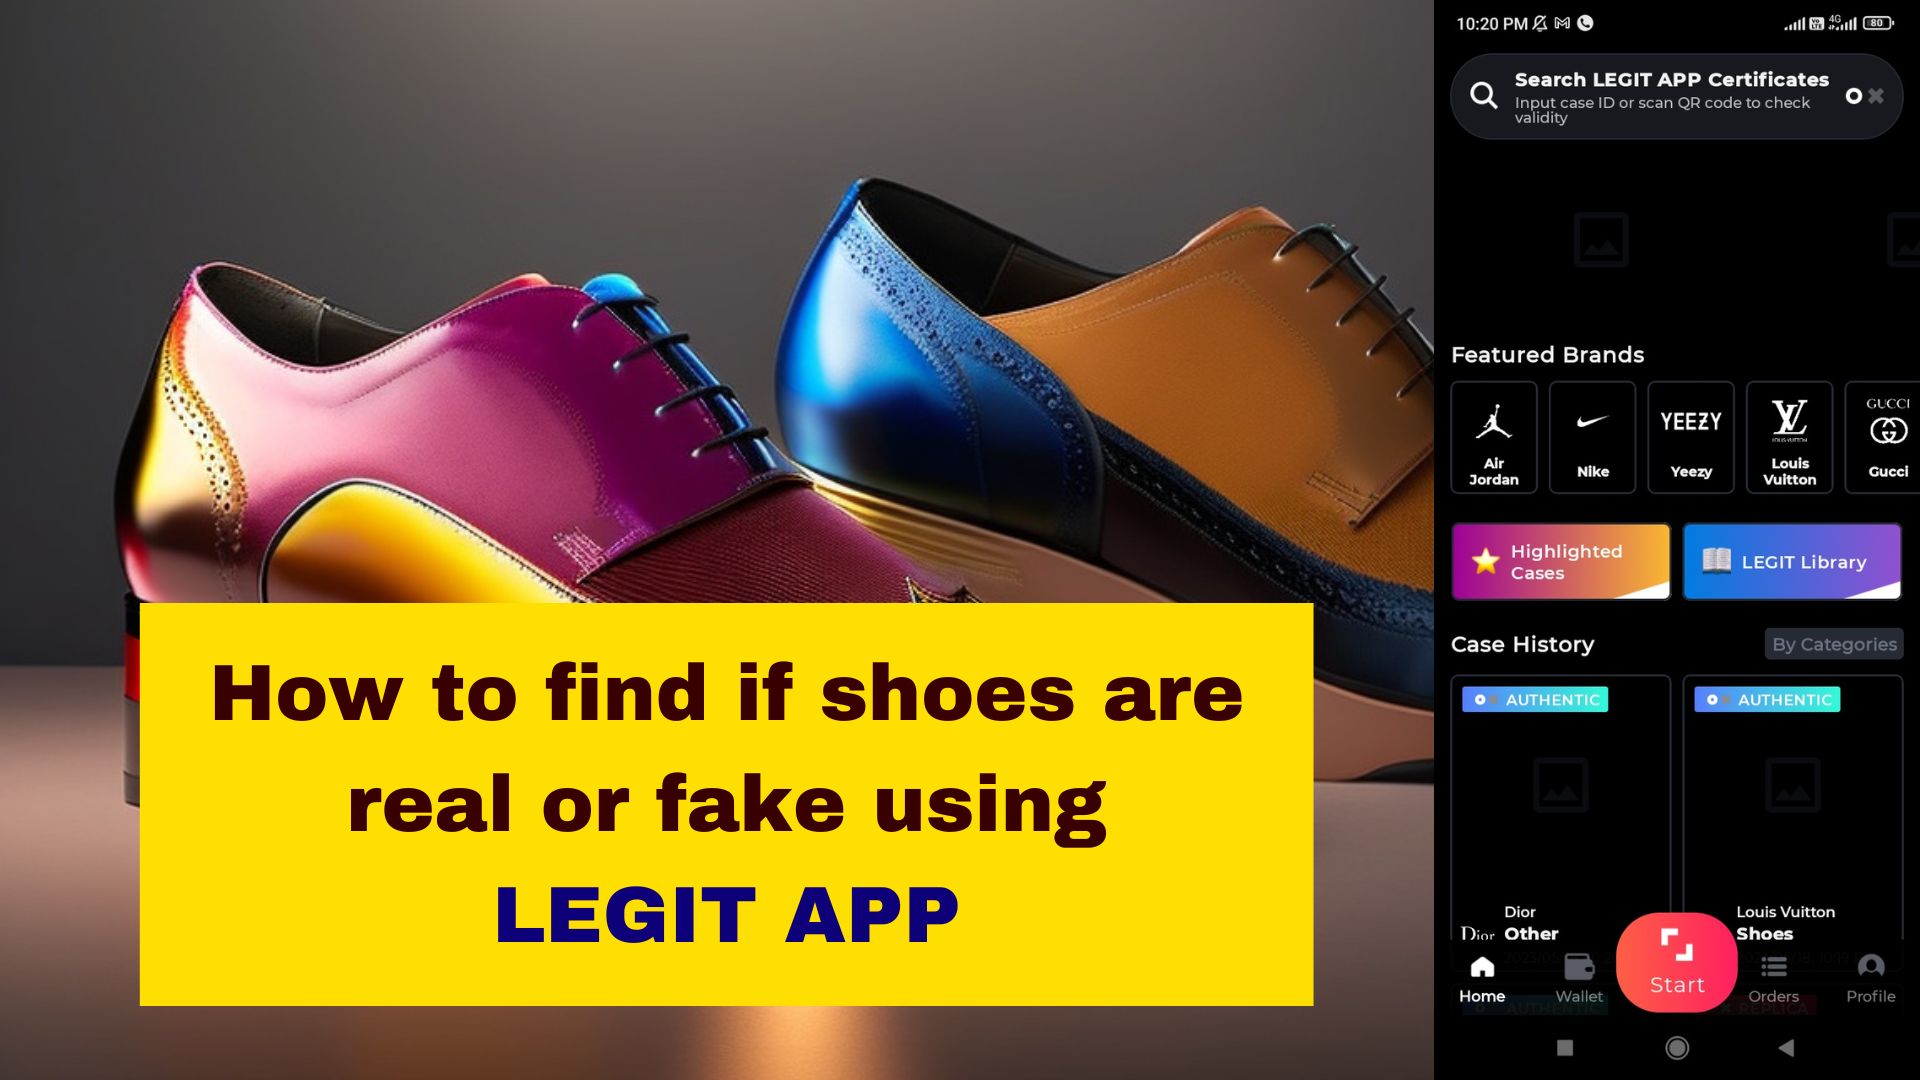 How to find if shoes are real or fake using LEGIT APP